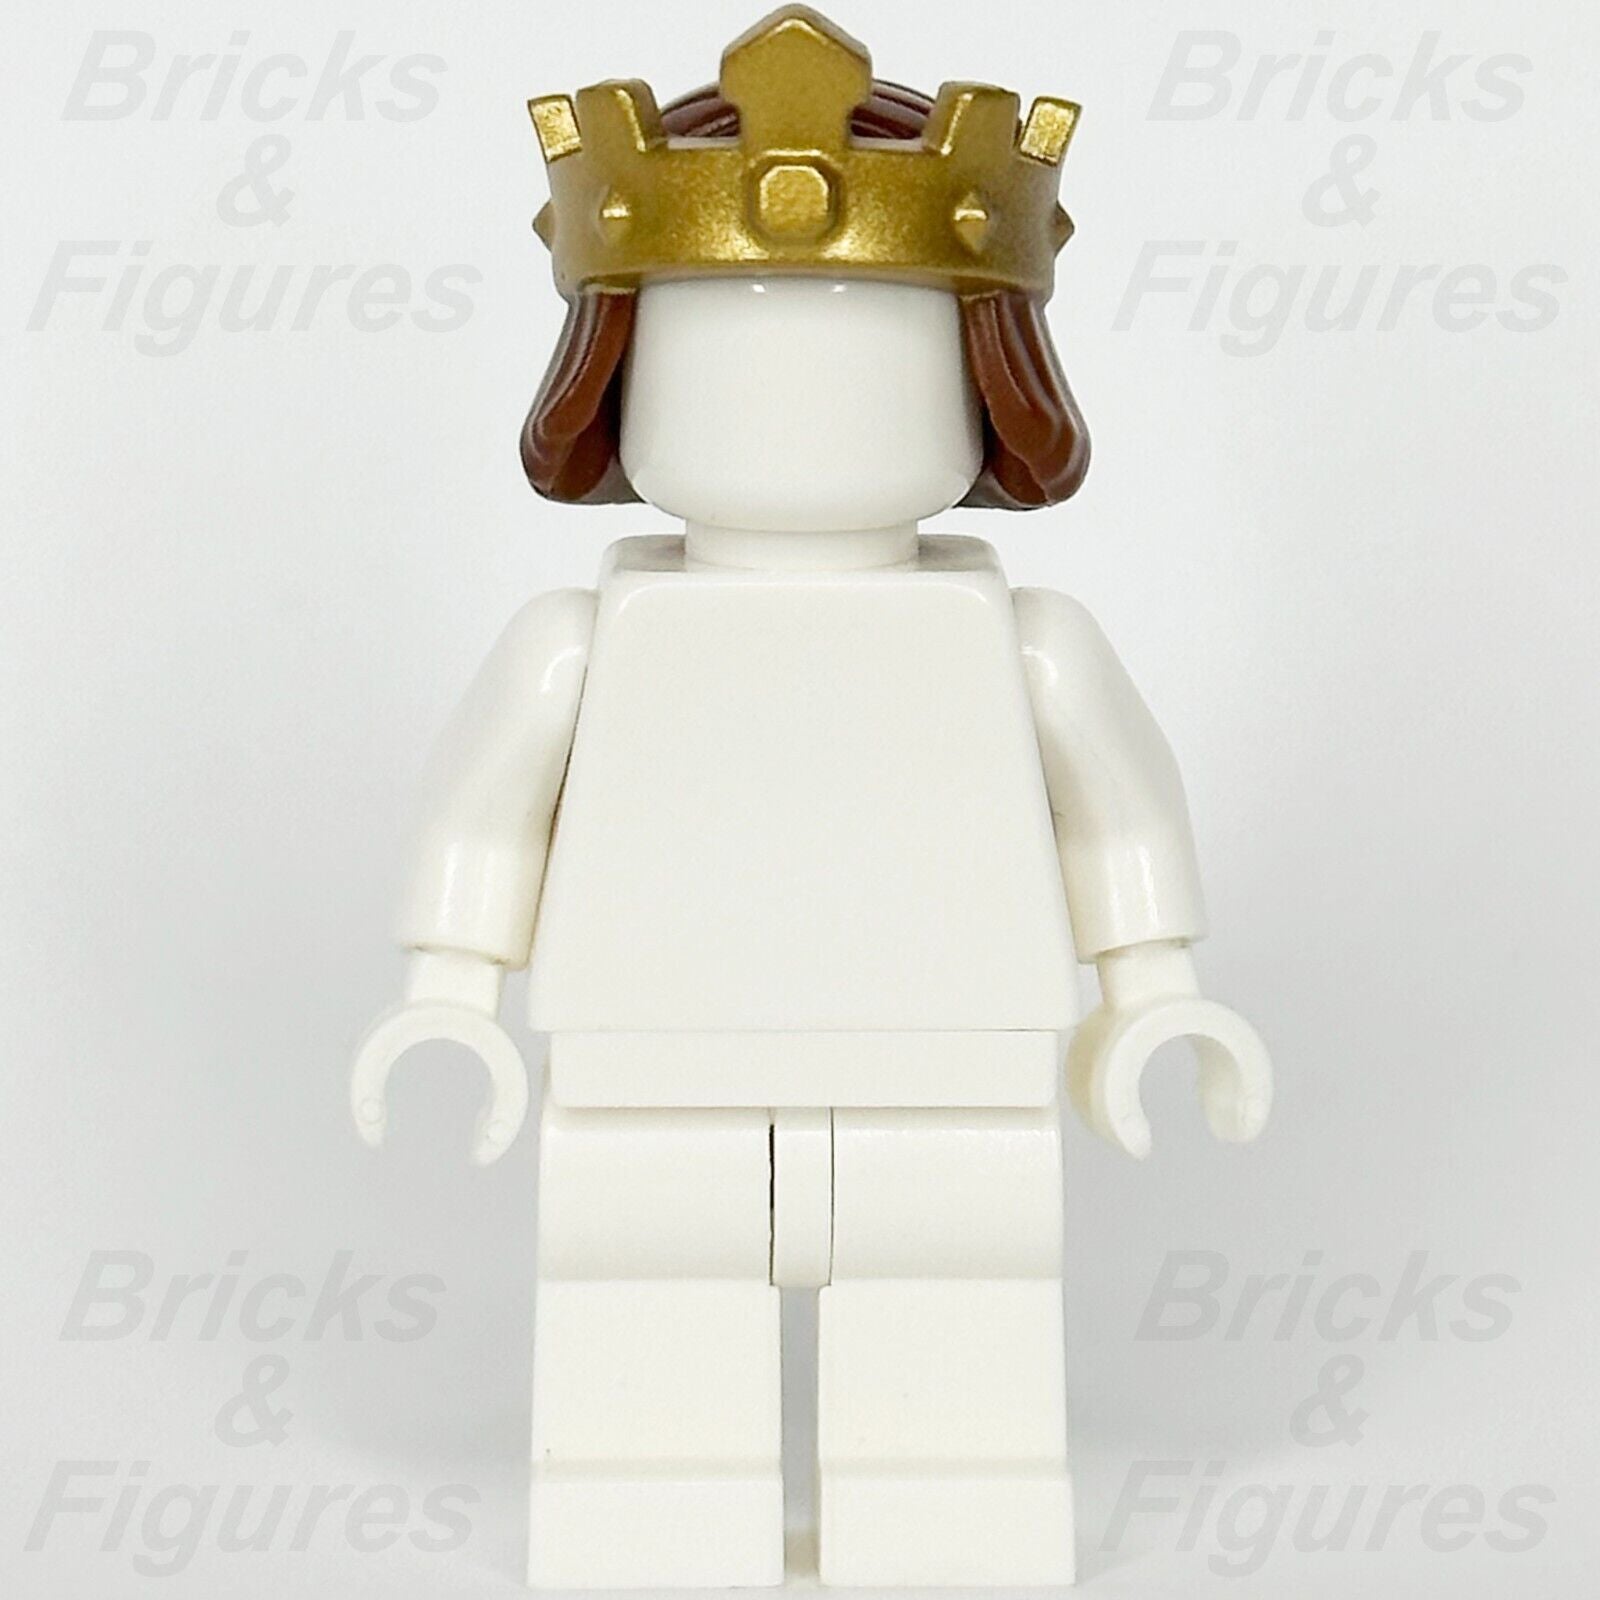 LEGO Castle Gold Crown with Reddish Brown Hair Minifigure Part 18835pb01 King 6